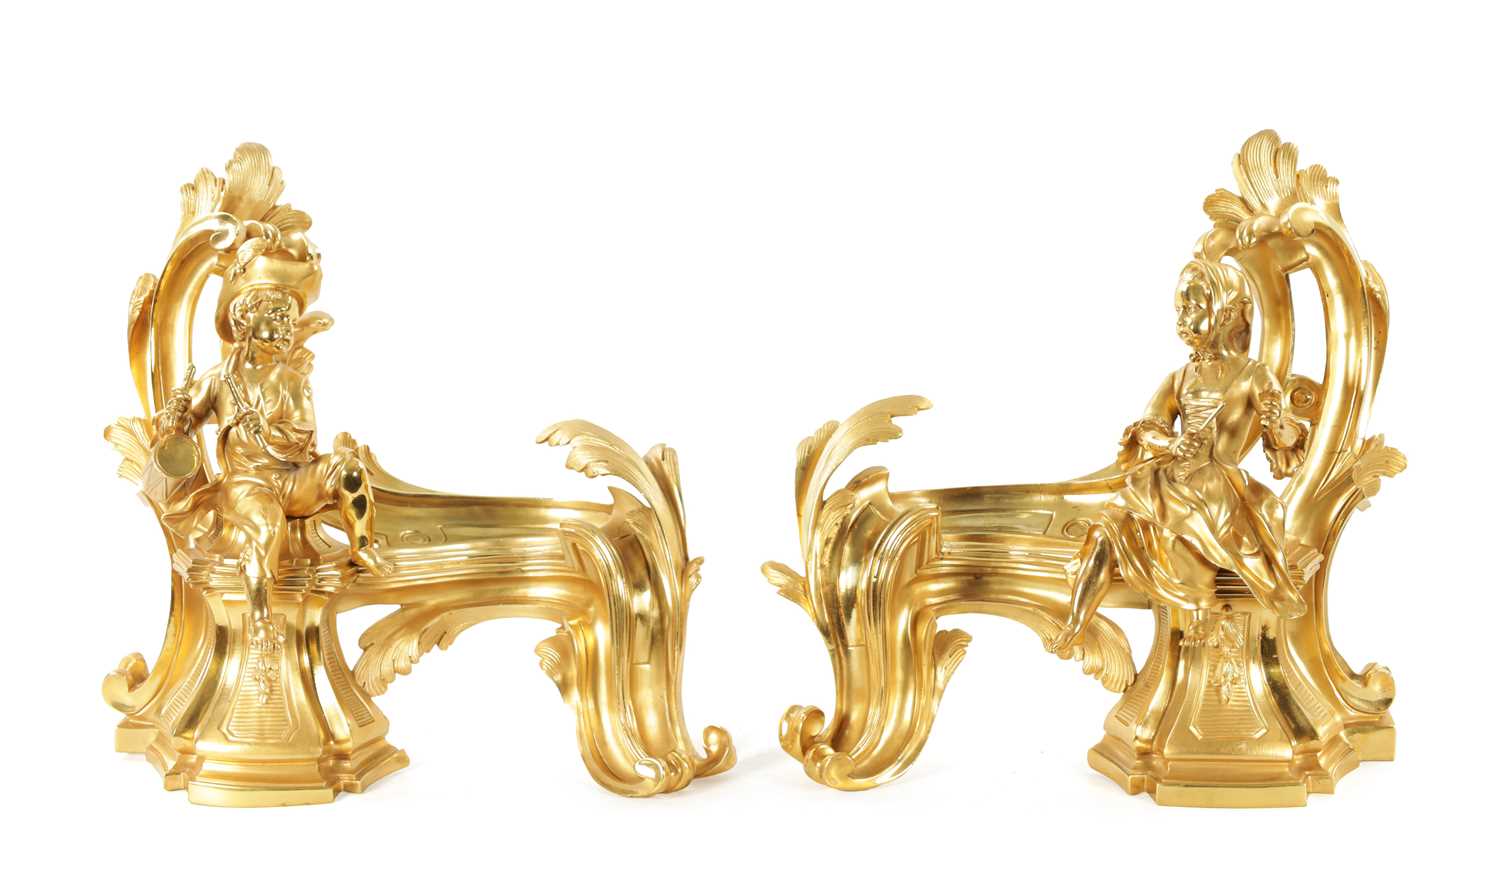 Lot 1003 - A PAIR OF 19TH CENTURY GILT ORMOLU CHENETS OF ROCOCO CHIPPENDALE DESIGN